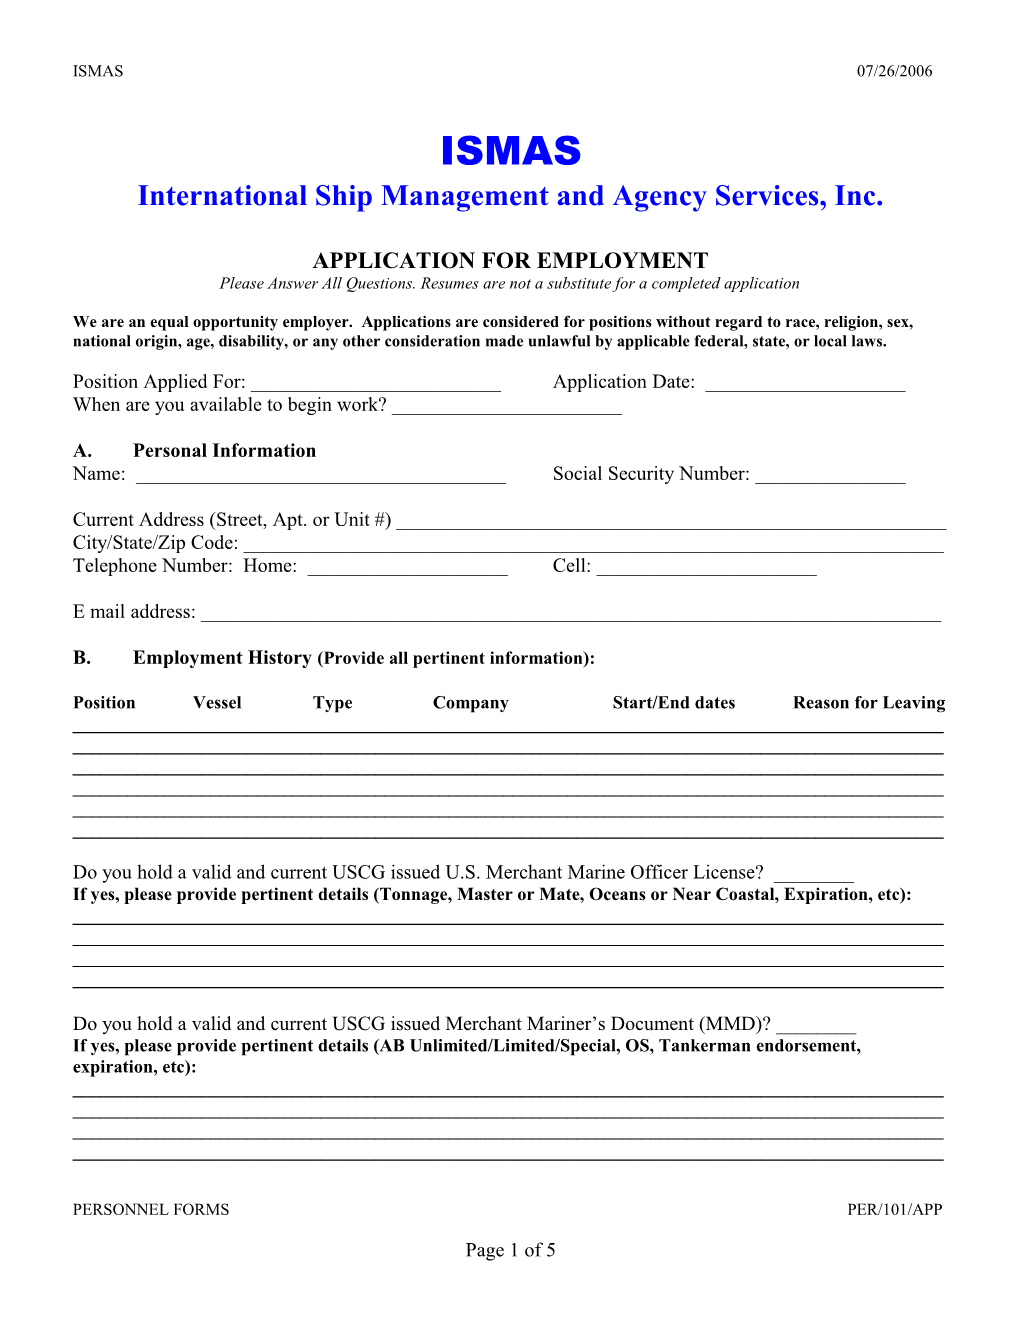 International Ship Management and Agency Services, Inc